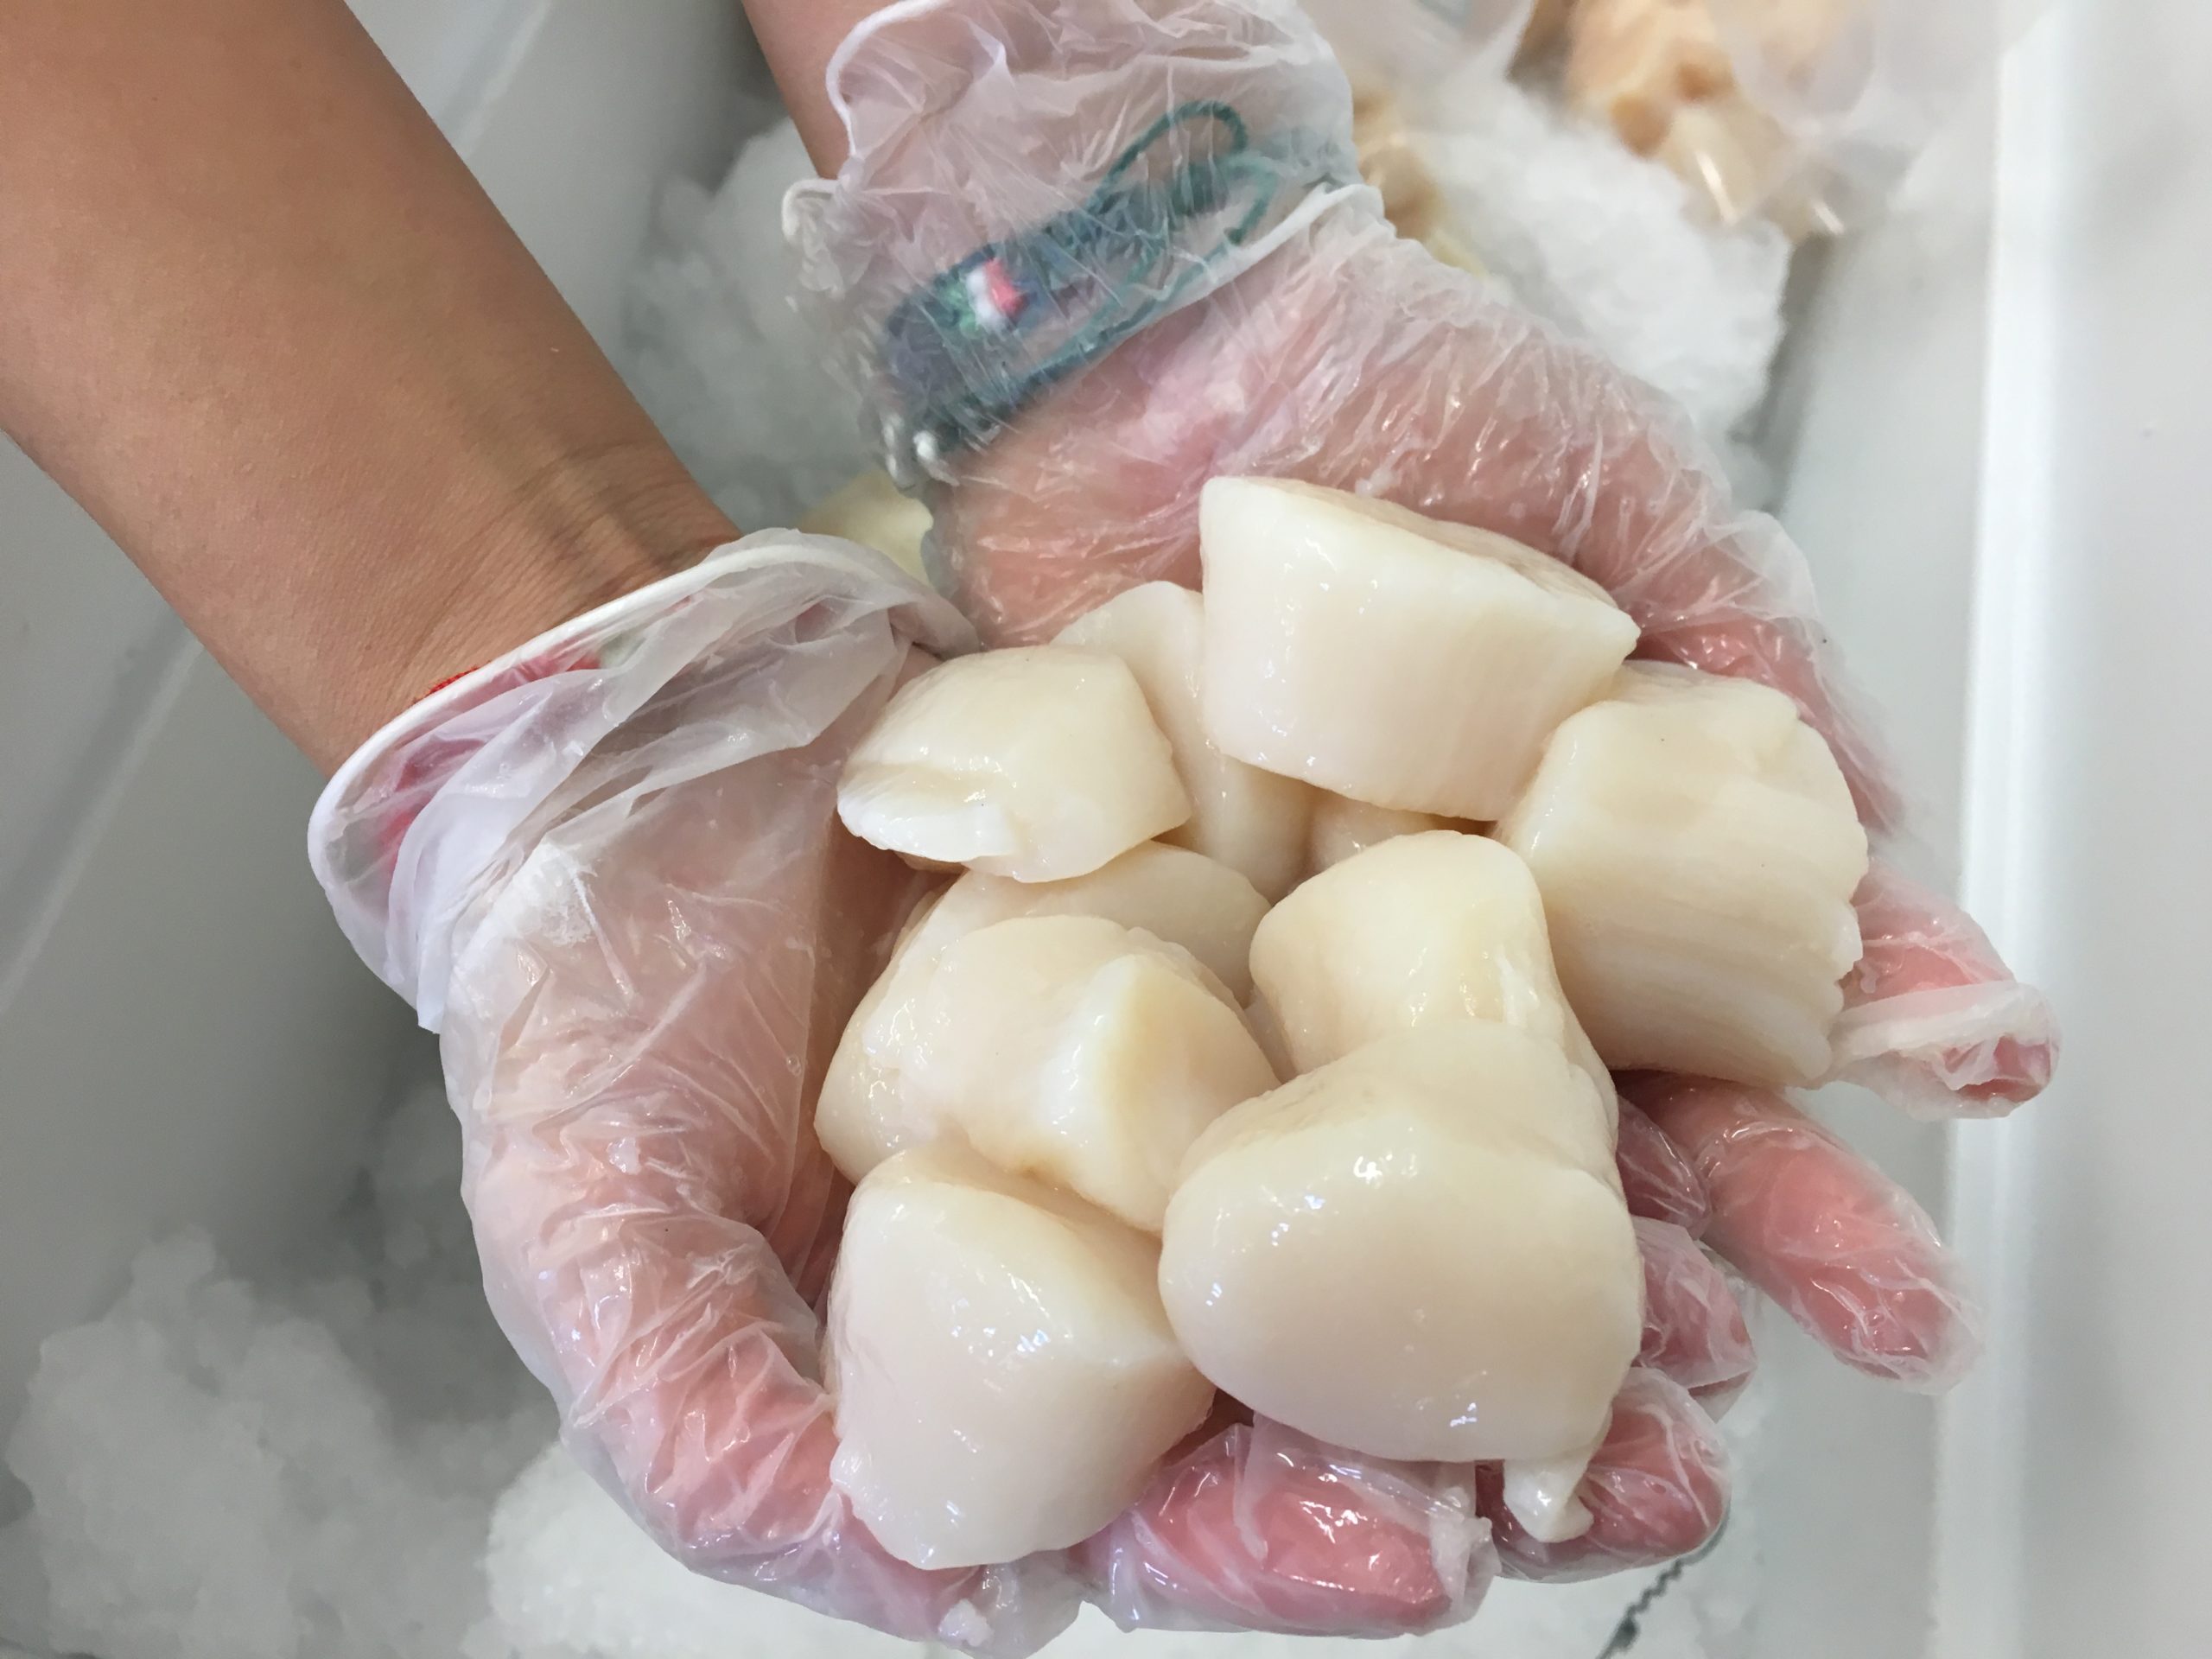 Two hands in clear plastic gloves hold fresh scallops